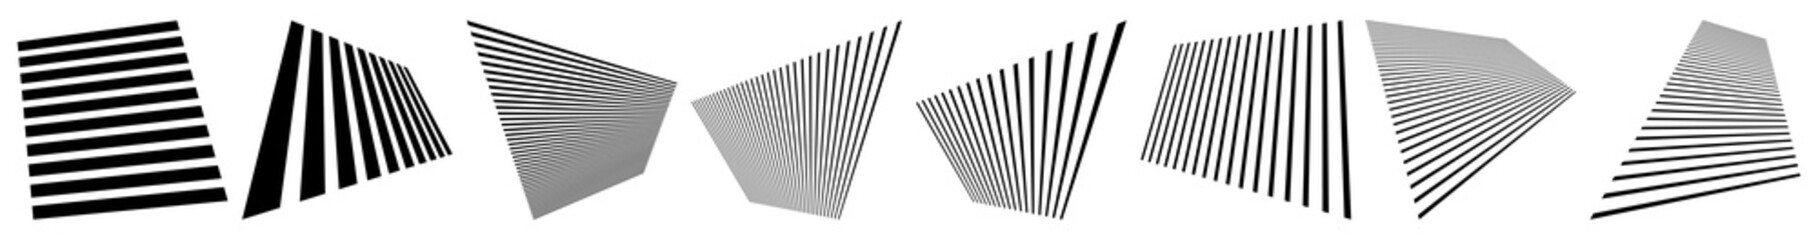 3d lines, stipes in perspective vanishing, diminishing into horizon